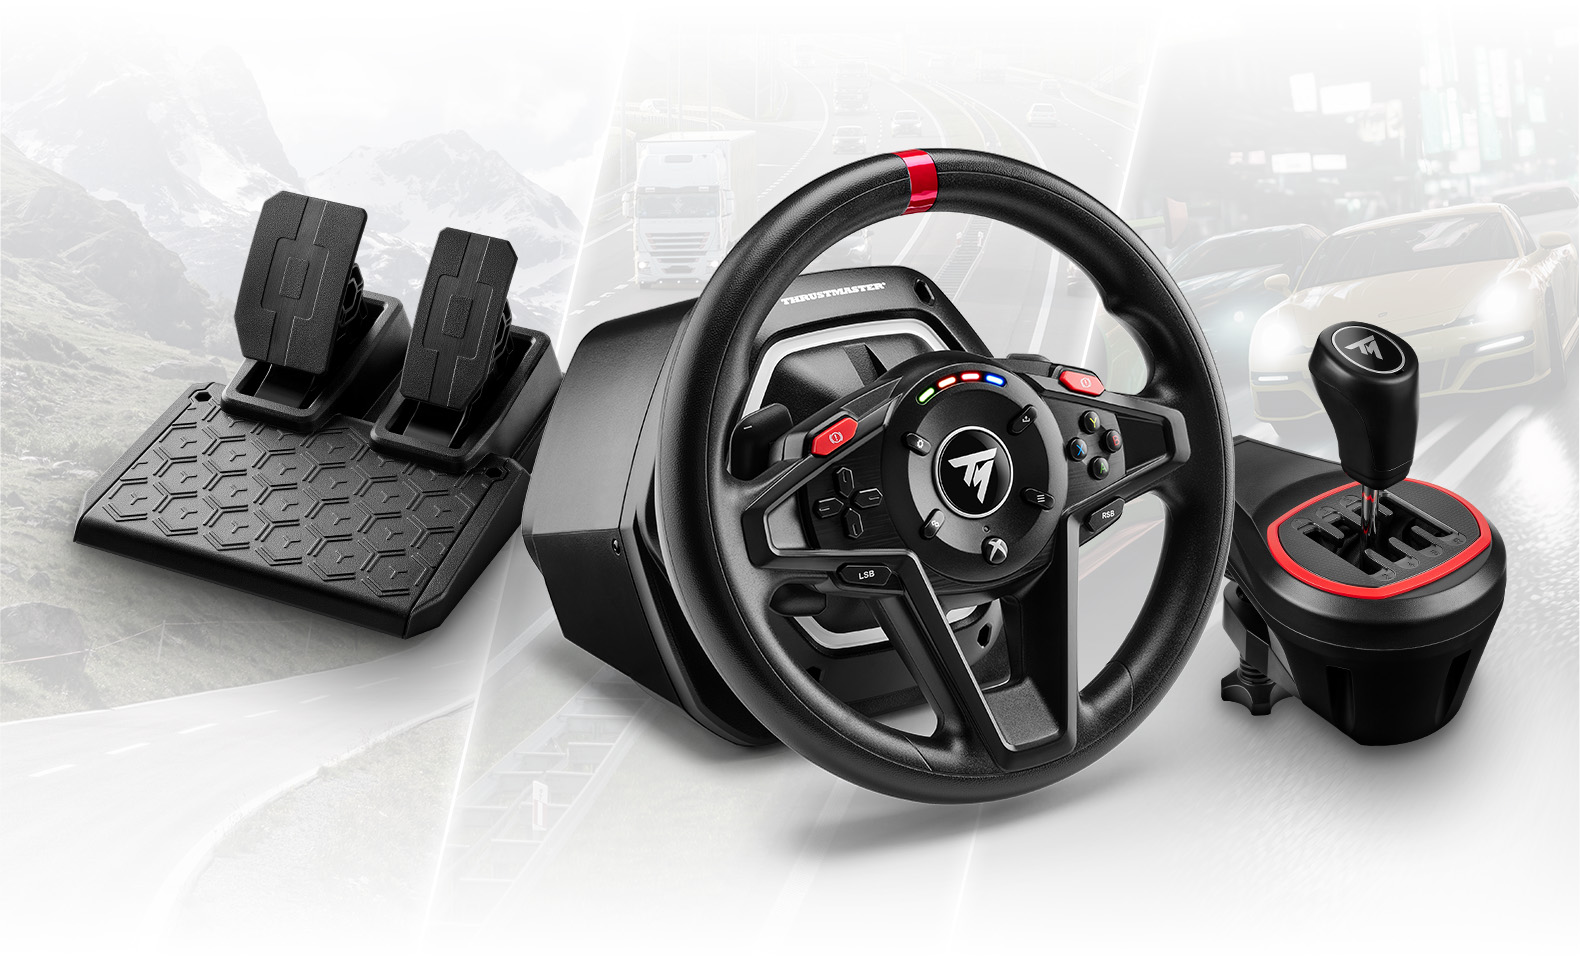 The new master of each track - Thrustmaster